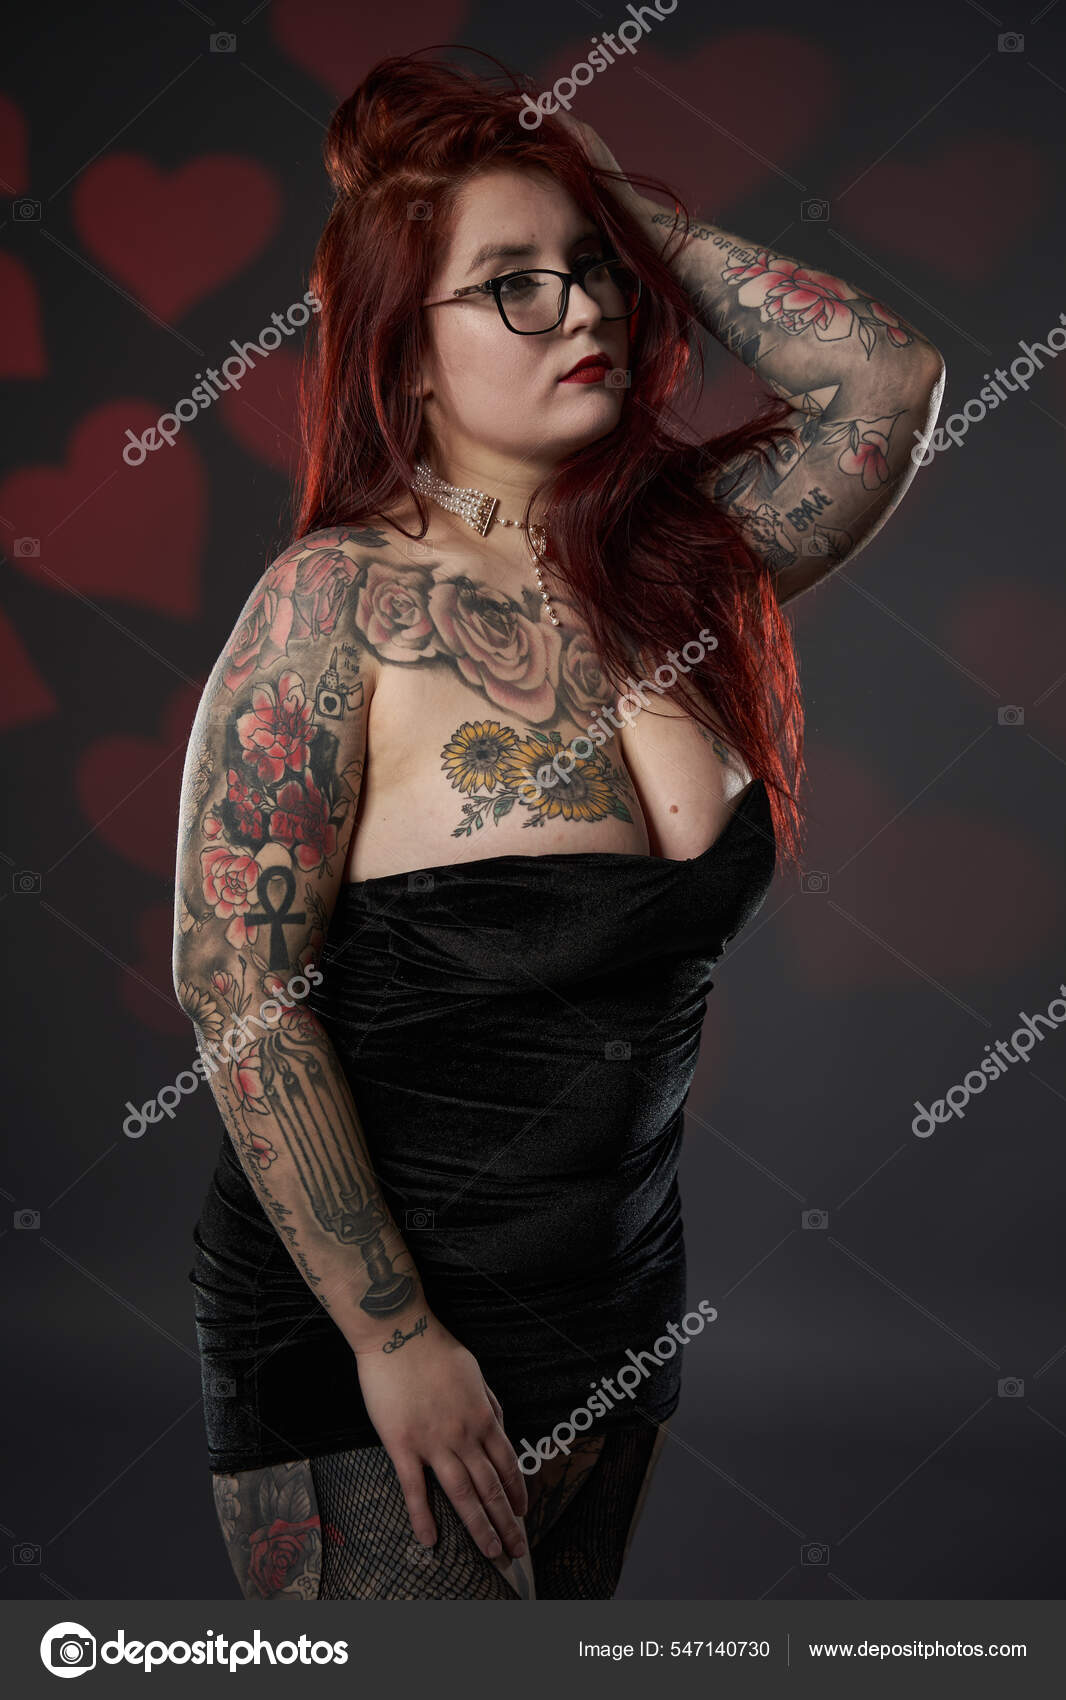 80 Plus Size Pin Up Girl Tattoo Pic Stock Photos Pictures  RoyaltyFree  Images  iStock